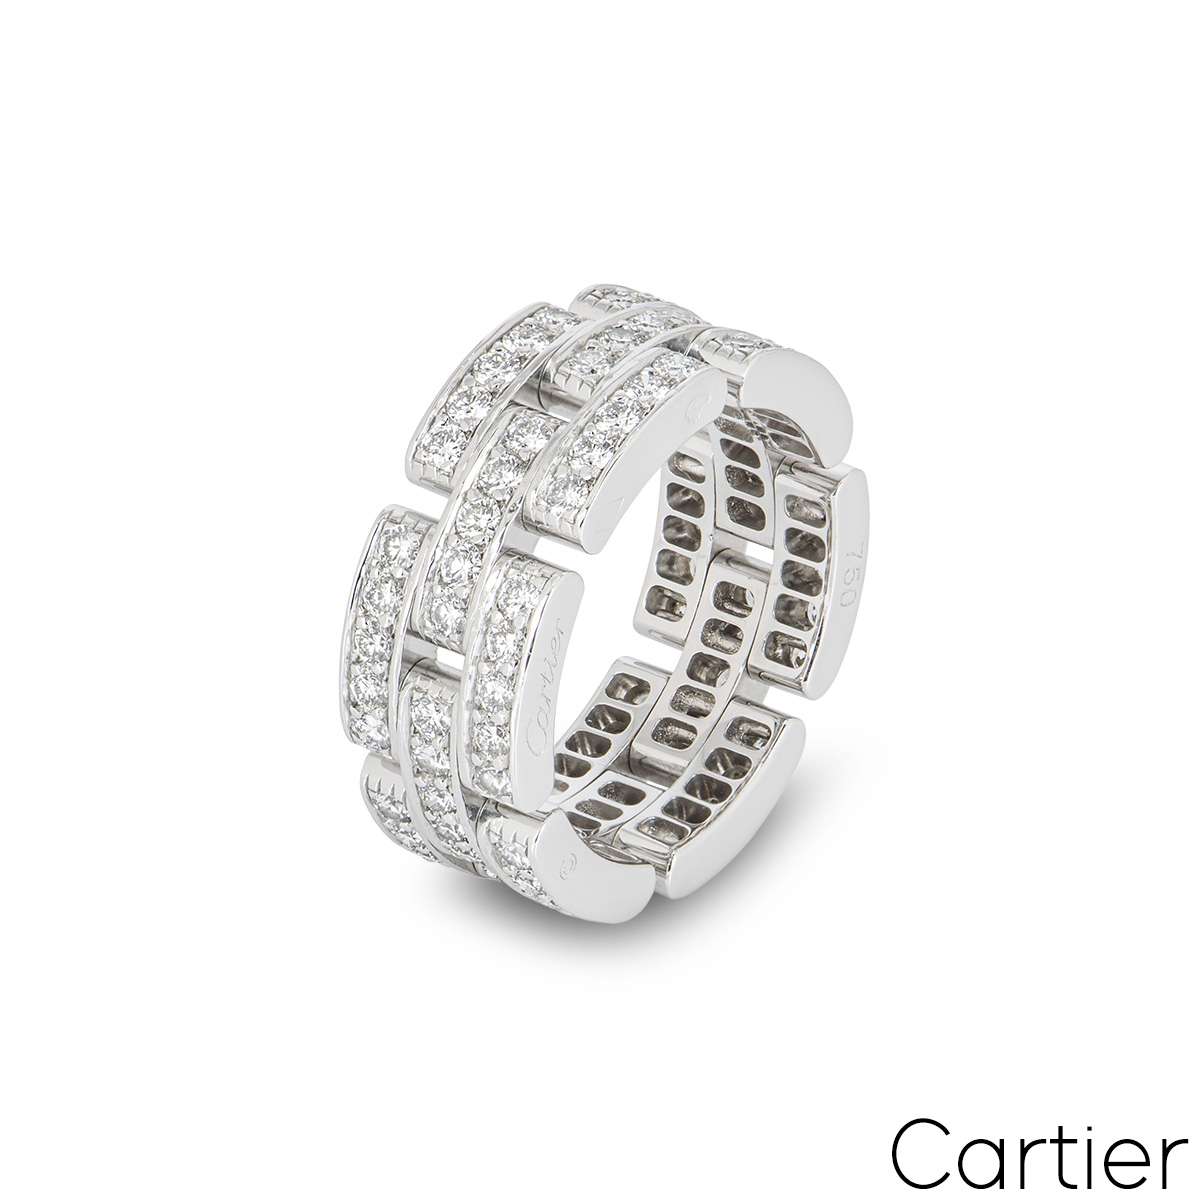 Cartier White Gold Maillon Panthere Ring B4111700 | Rich Diamonds